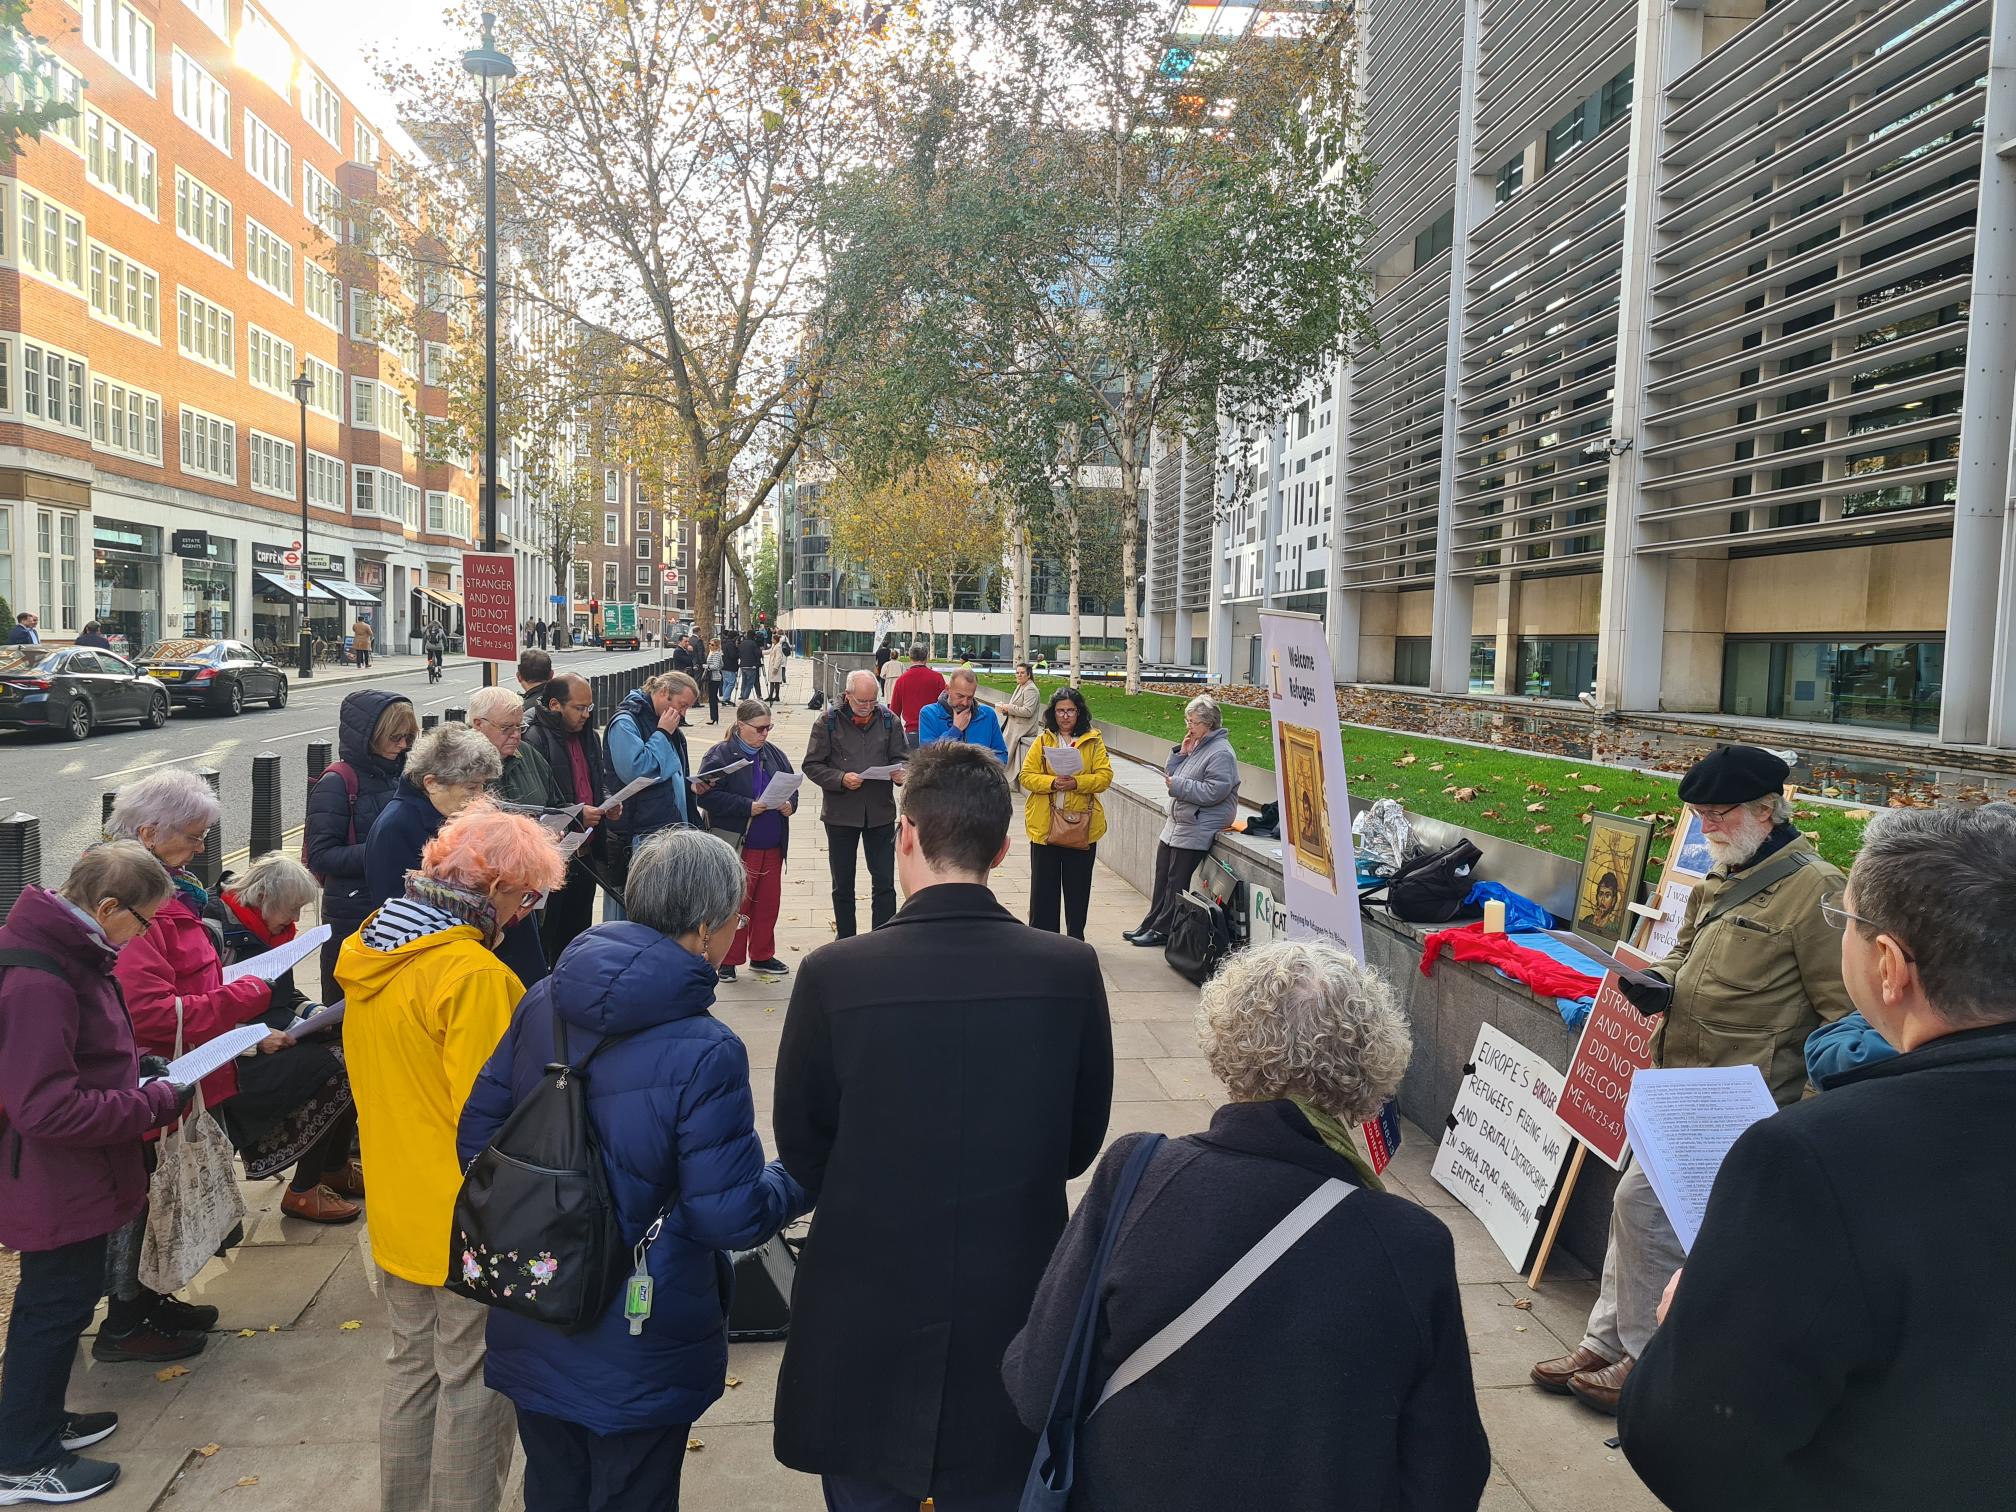 Memorial Prayer Vigil for refugees in front of the Home Office